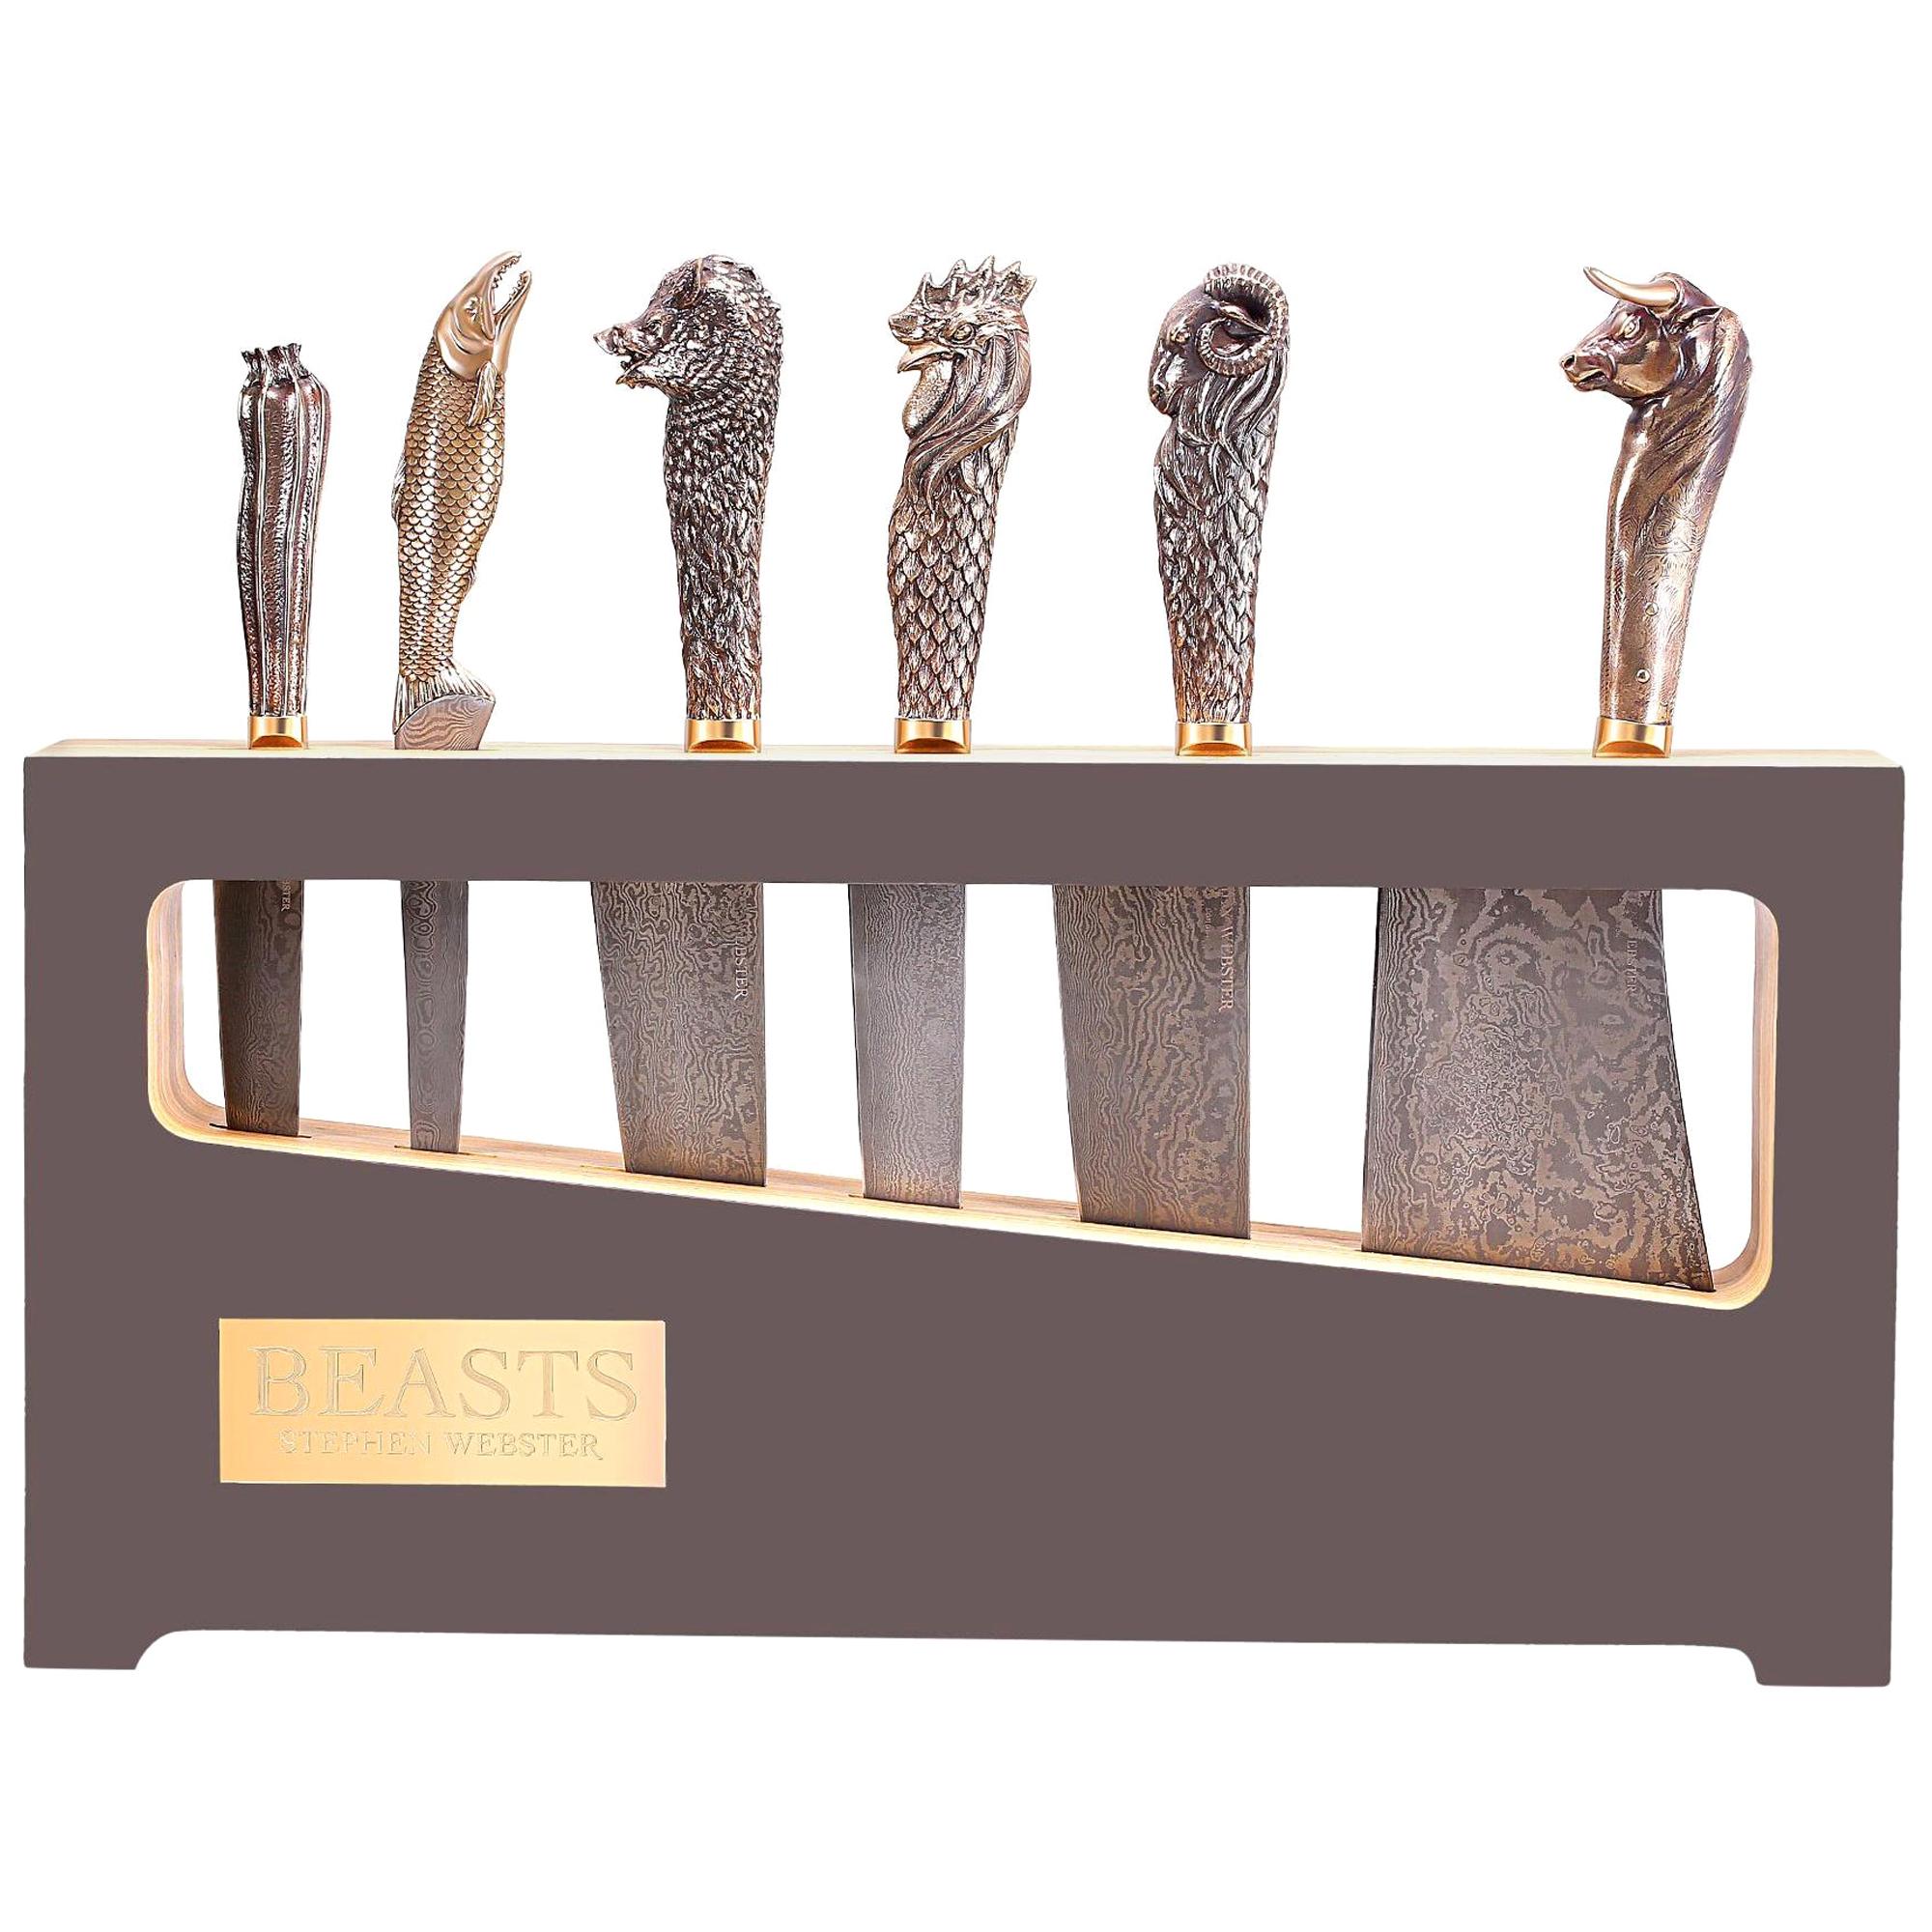 Stephen Webster Beasts Chef's Knives with Steel Blades and Bronze Handles For Sale